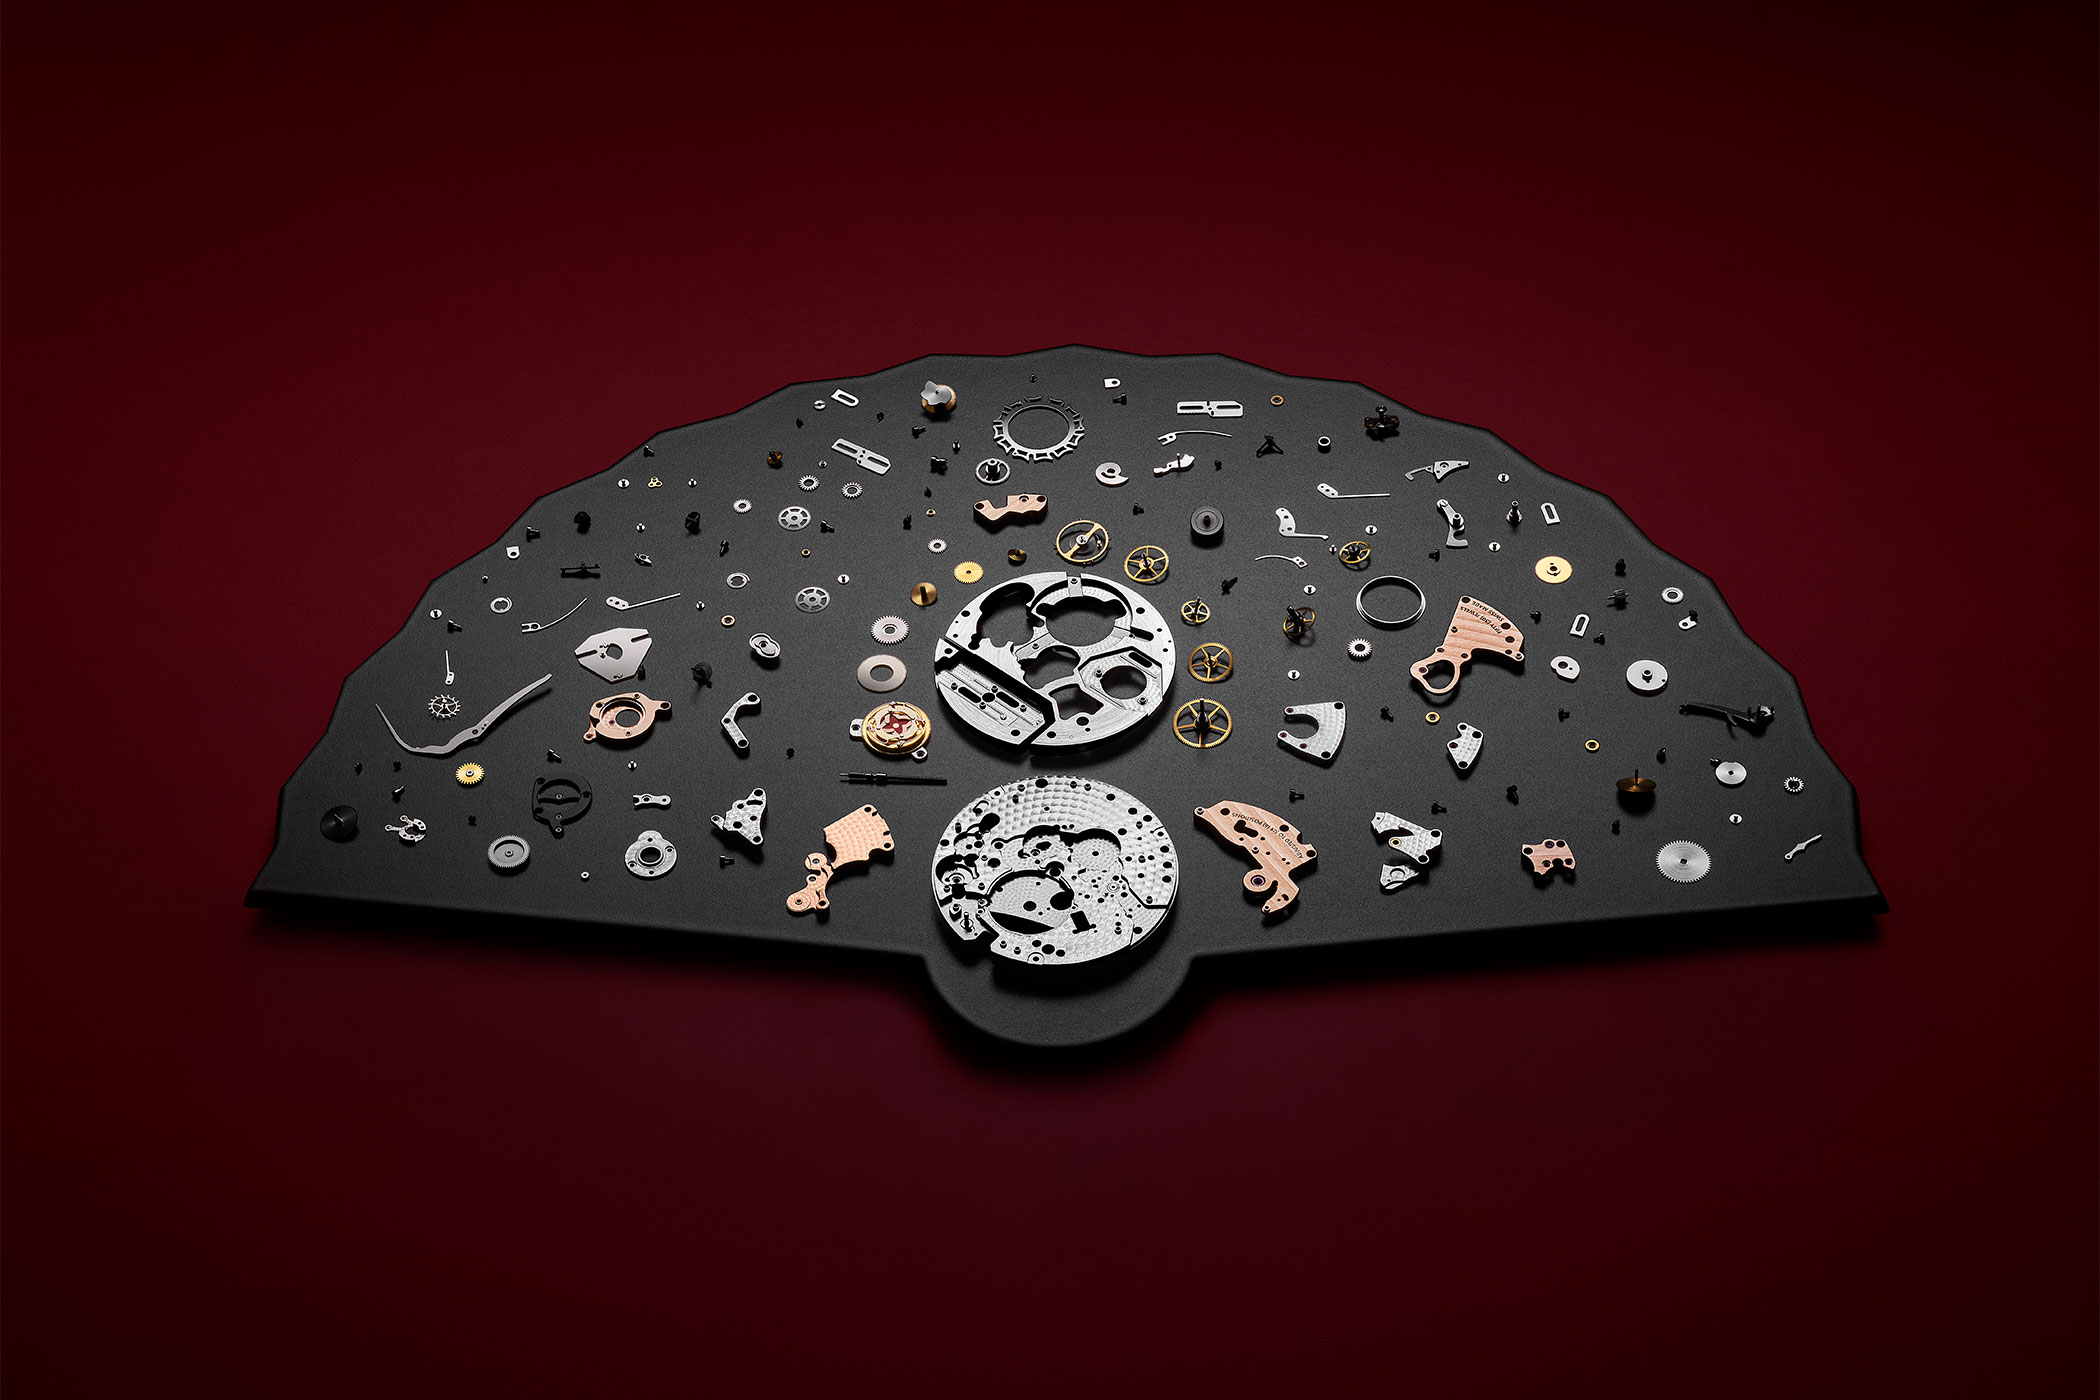 Introducing Louis Vuitton Sings A New Song With The Tambour Opera Automata